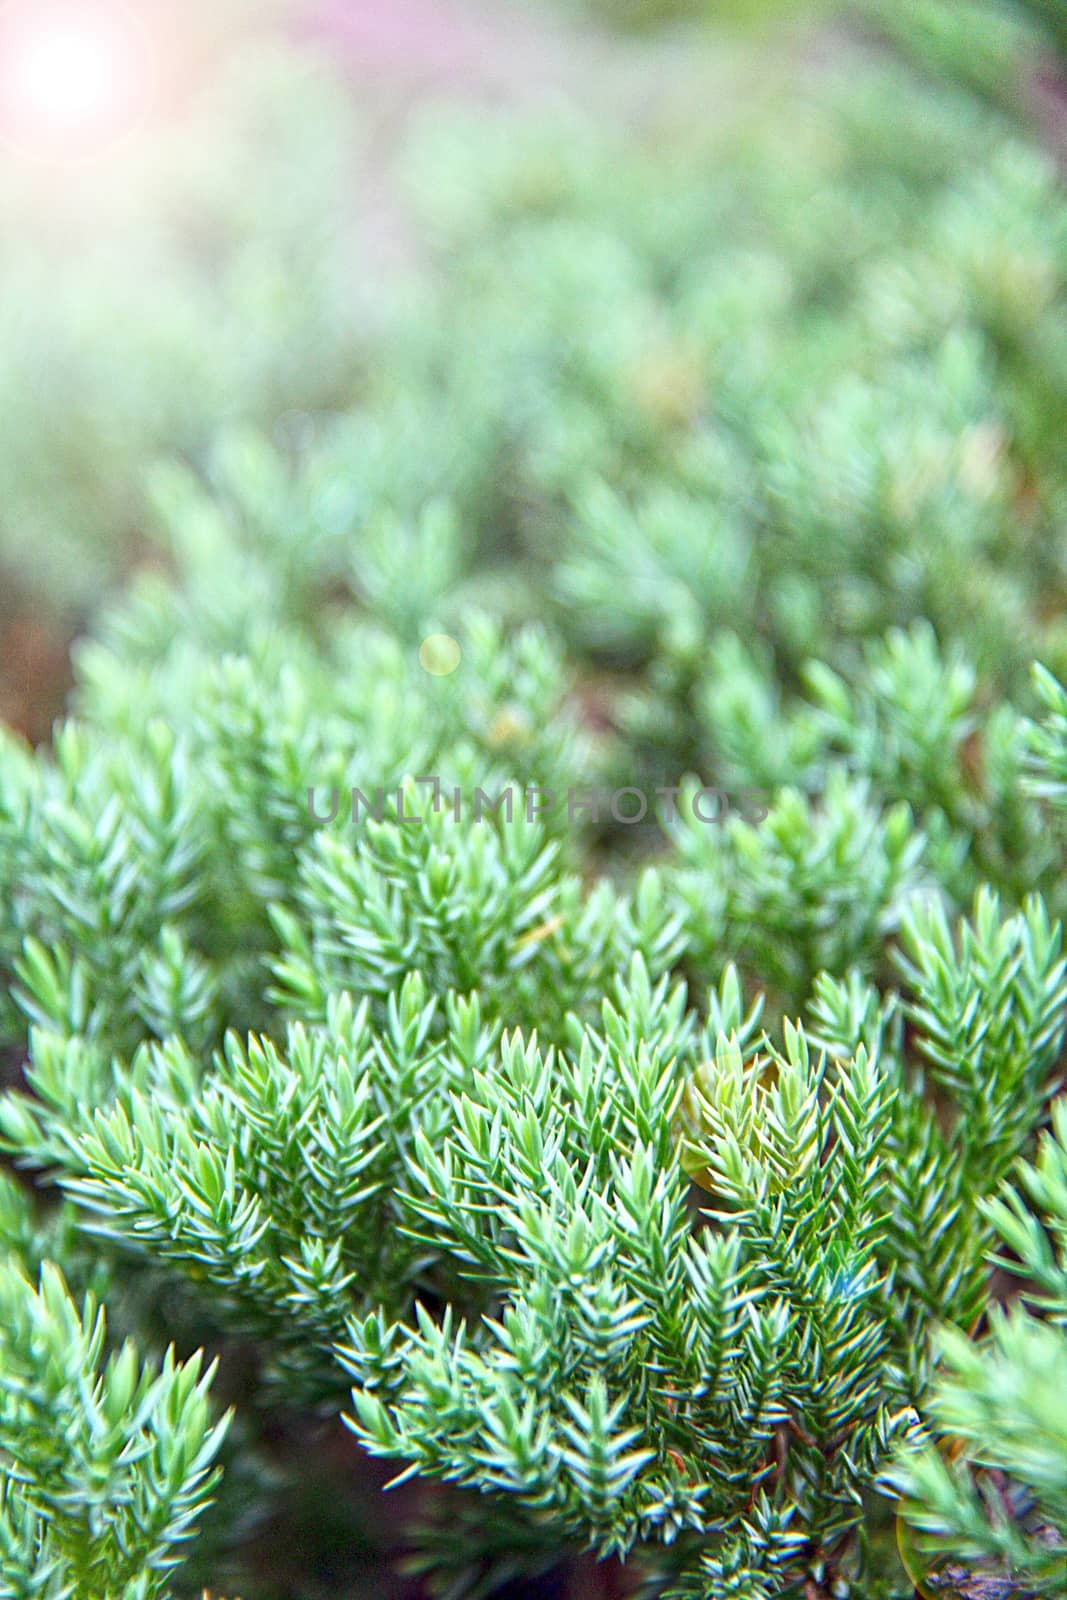 Pine green, ivy or Japanese juniperus procumbens in the garden with lens flare effect, selective focus and soft focus







Pine green, ivy or Japanese juniperus procumbens in the garden with lens flare effect, selective focus and soft focus